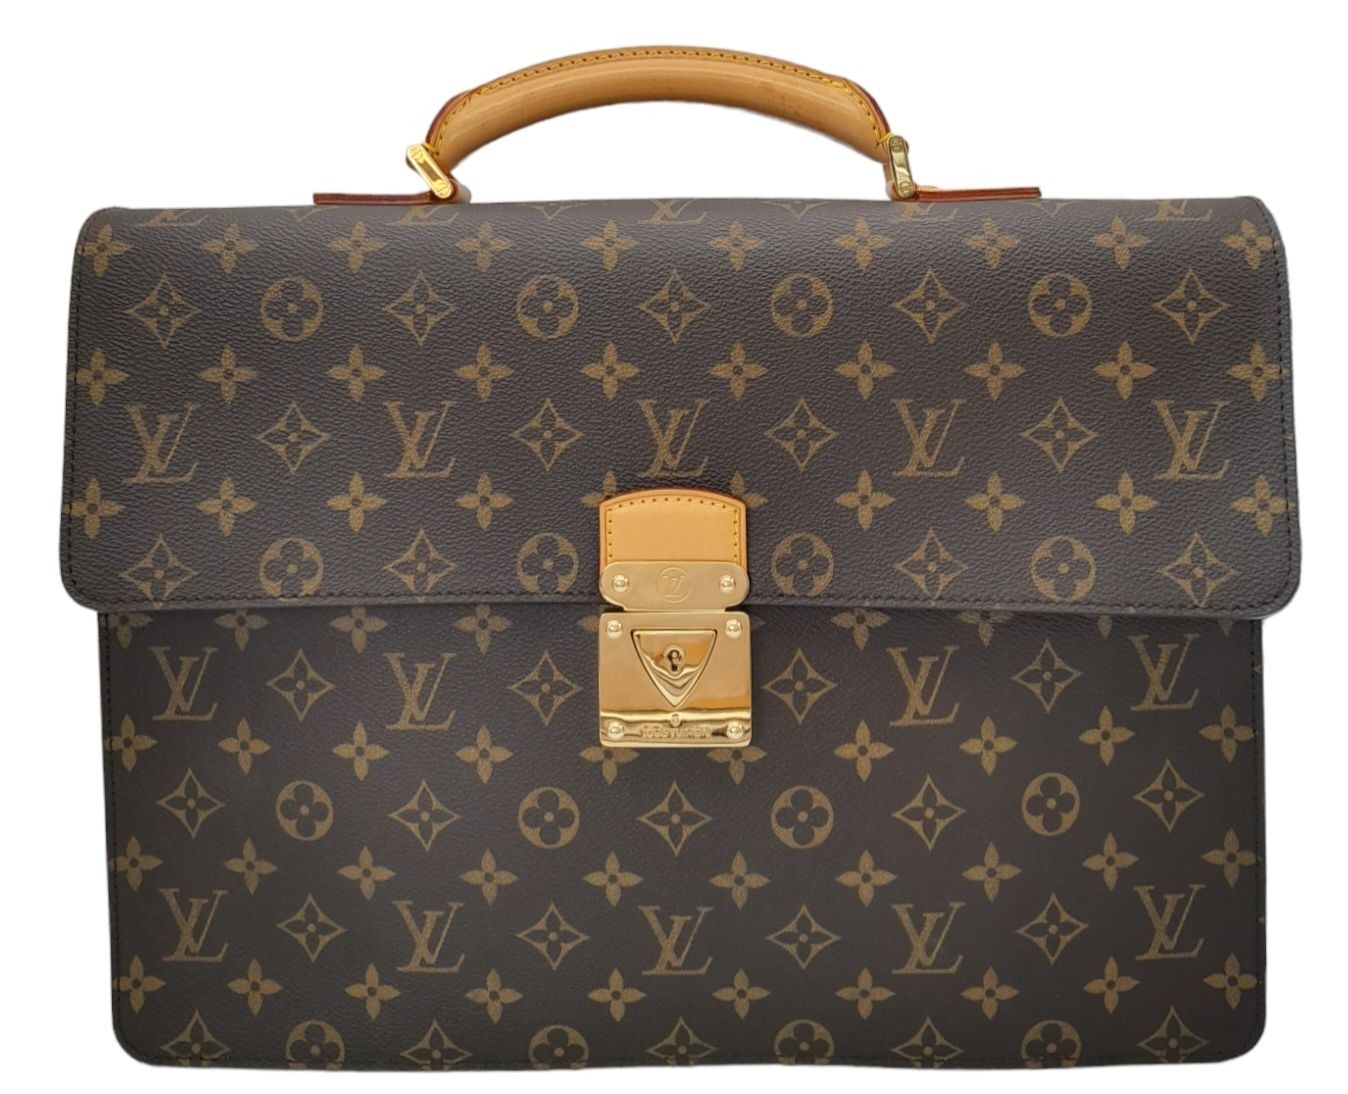 AN IMMACULATE LOUIS VUITTON CLASSIC BRIEF CASE IN UNUSED CONDITION WITH ORIGINAL DUST COVER . 38 X